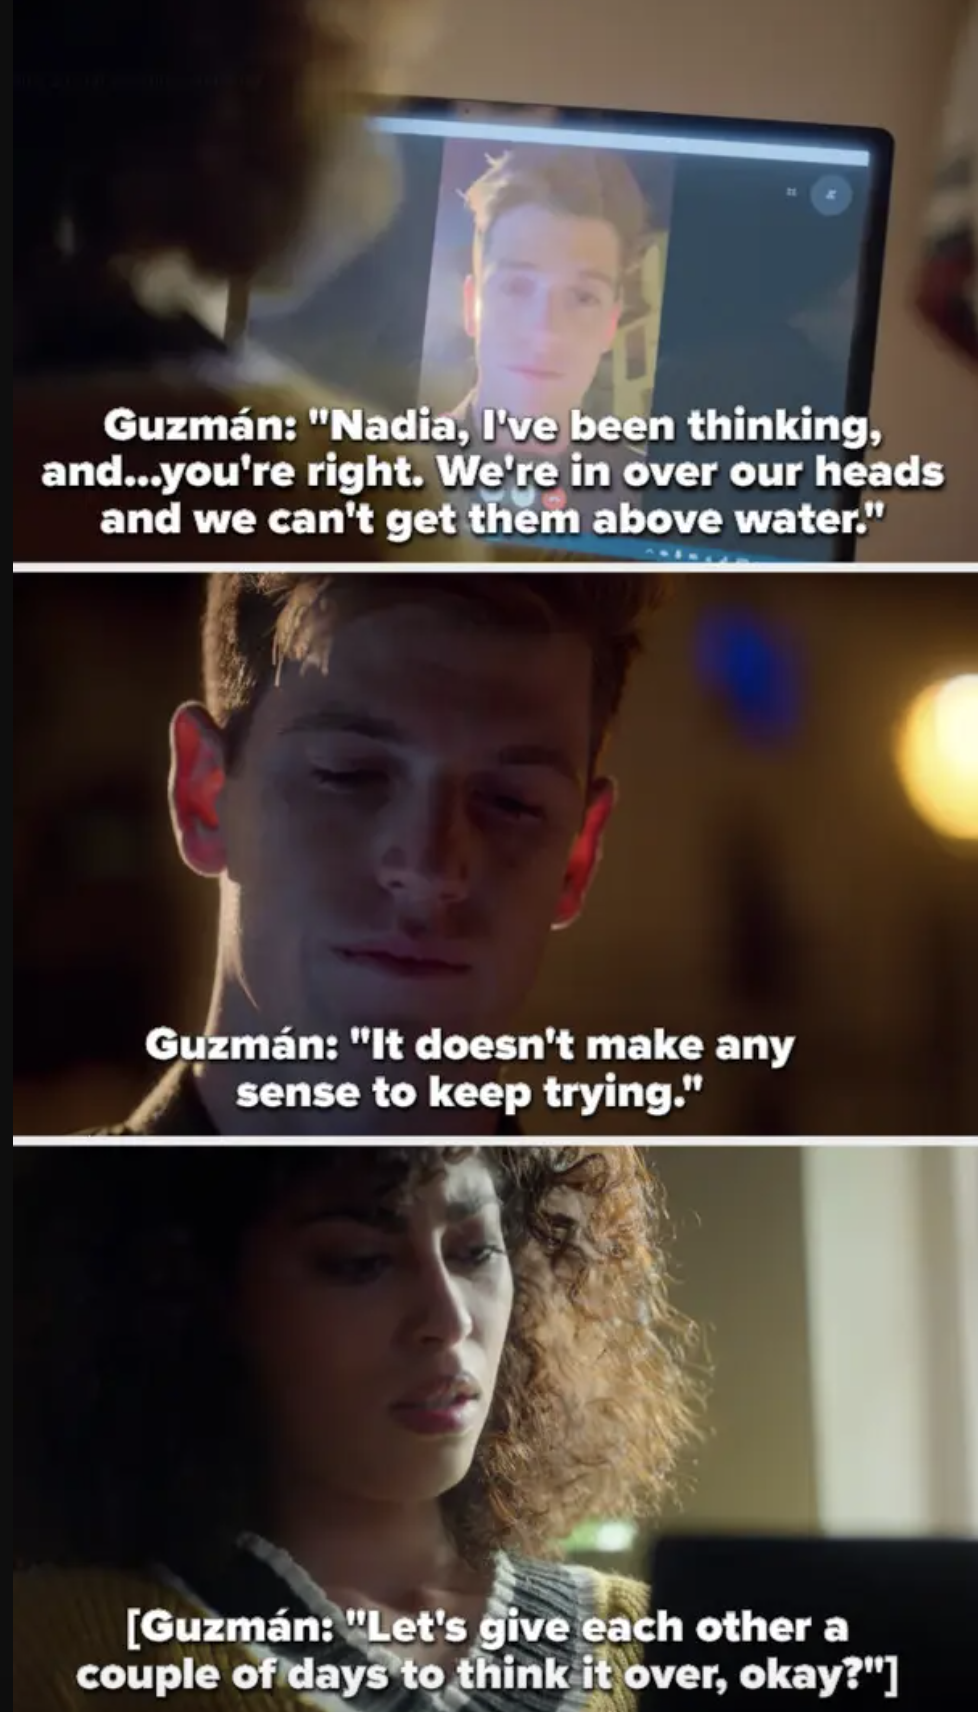 Guzmán breaks up with Nadia: &quot;it doesn&#x27;t make any sense to keep trying&quot;